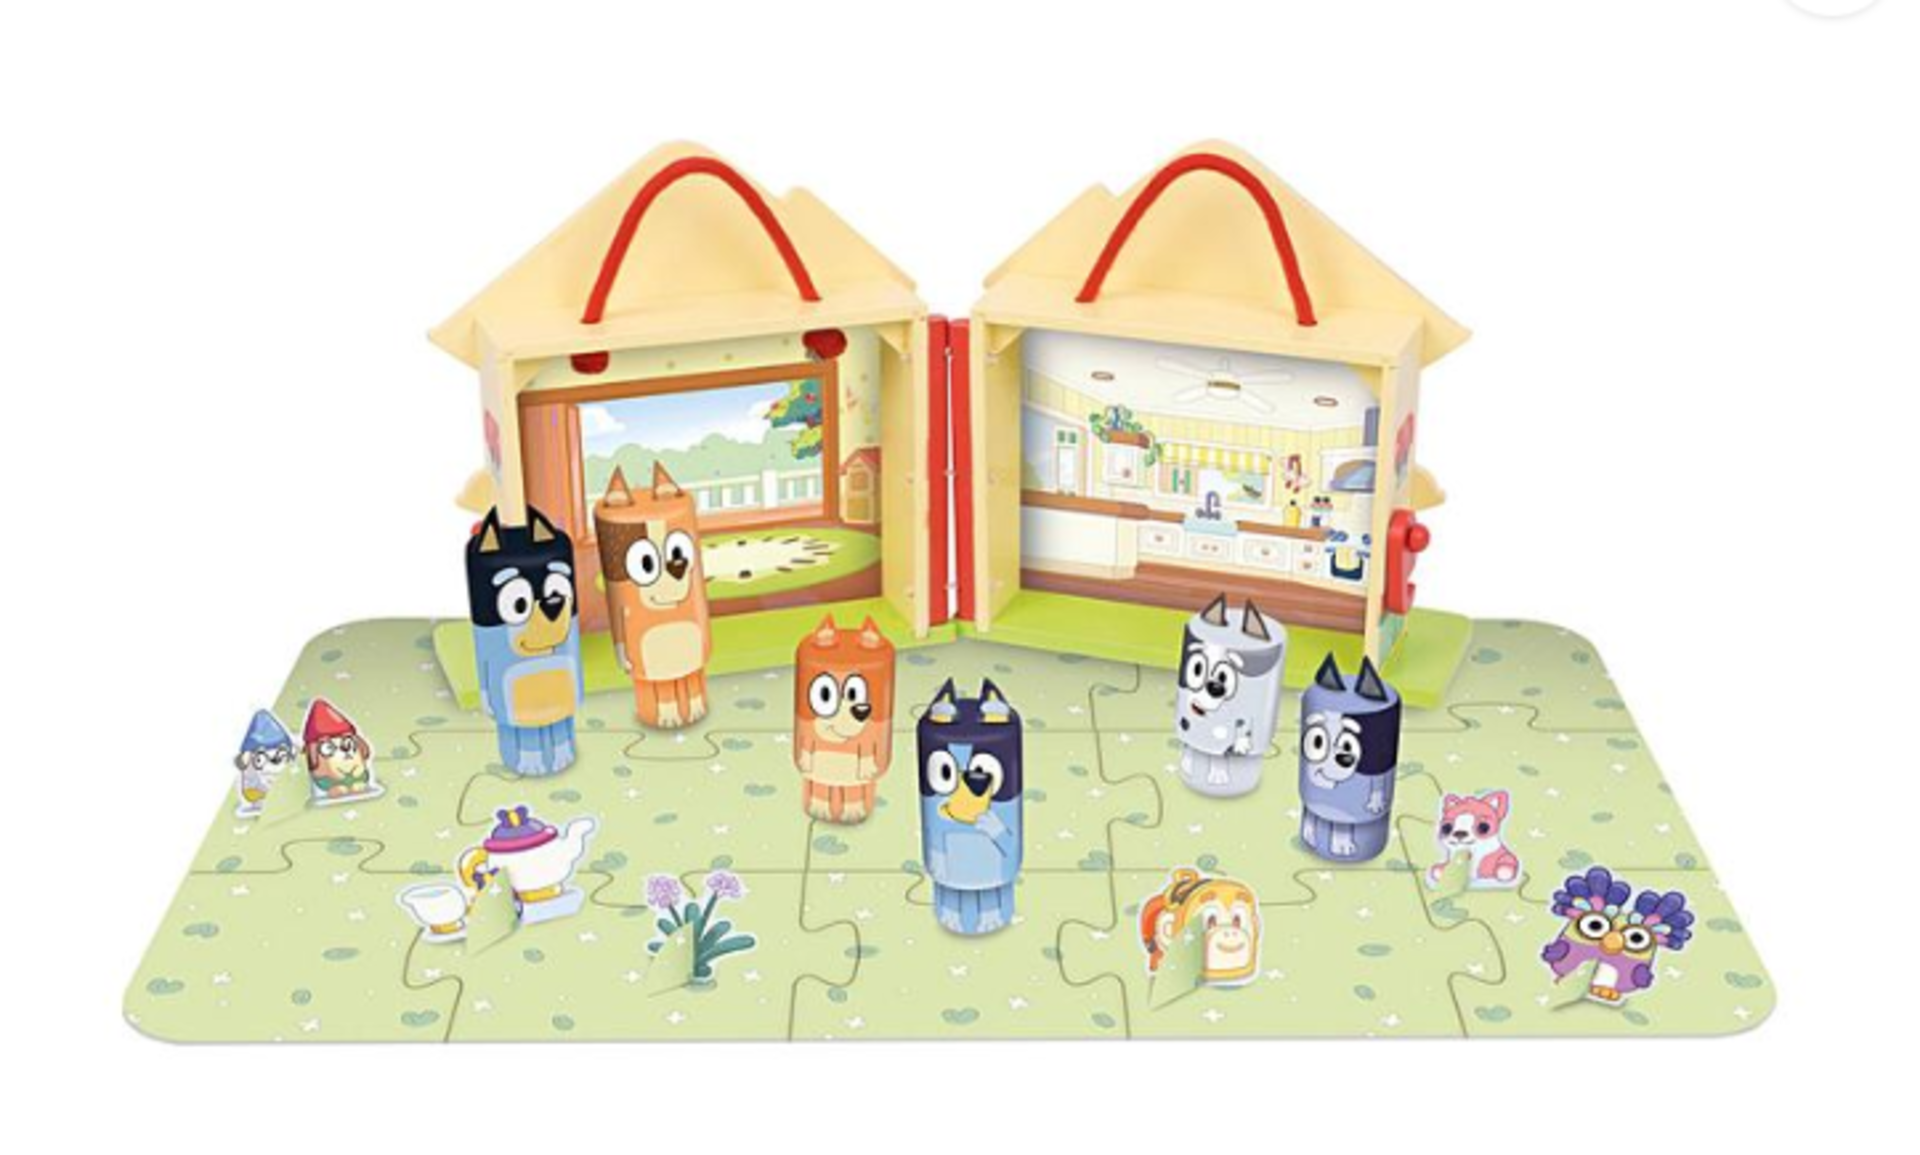 Bluey Wooden Carry Along House Playset with 6 Figures. - ER22. Resembling the iconic Heeler House